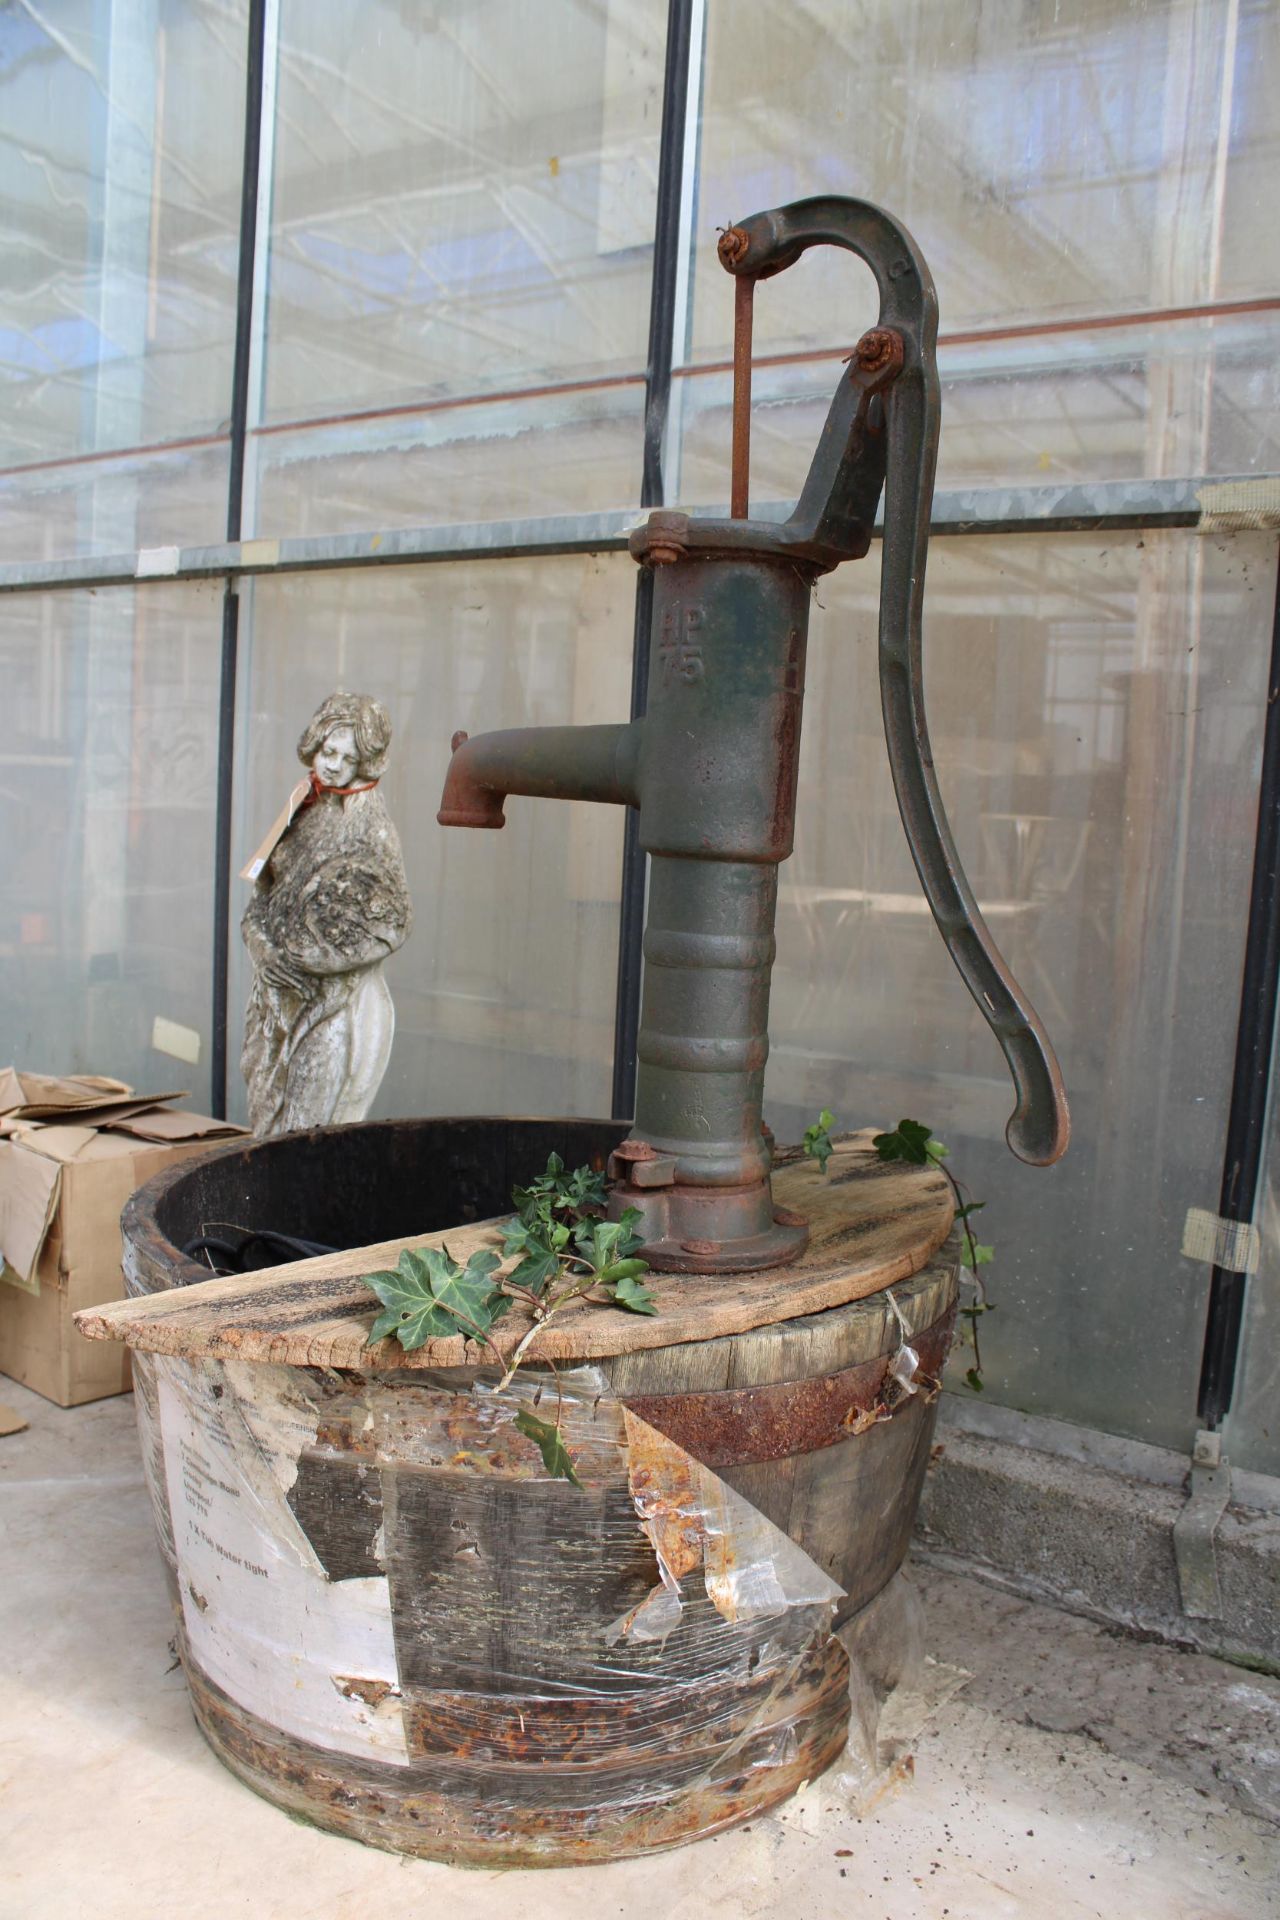 A VINTAGE WOODEN BARREL WATER FEATURE WITH VINTAGE CAST IRON WATER PUMP AND ELECTRIC PUMP - Image 2 of 3